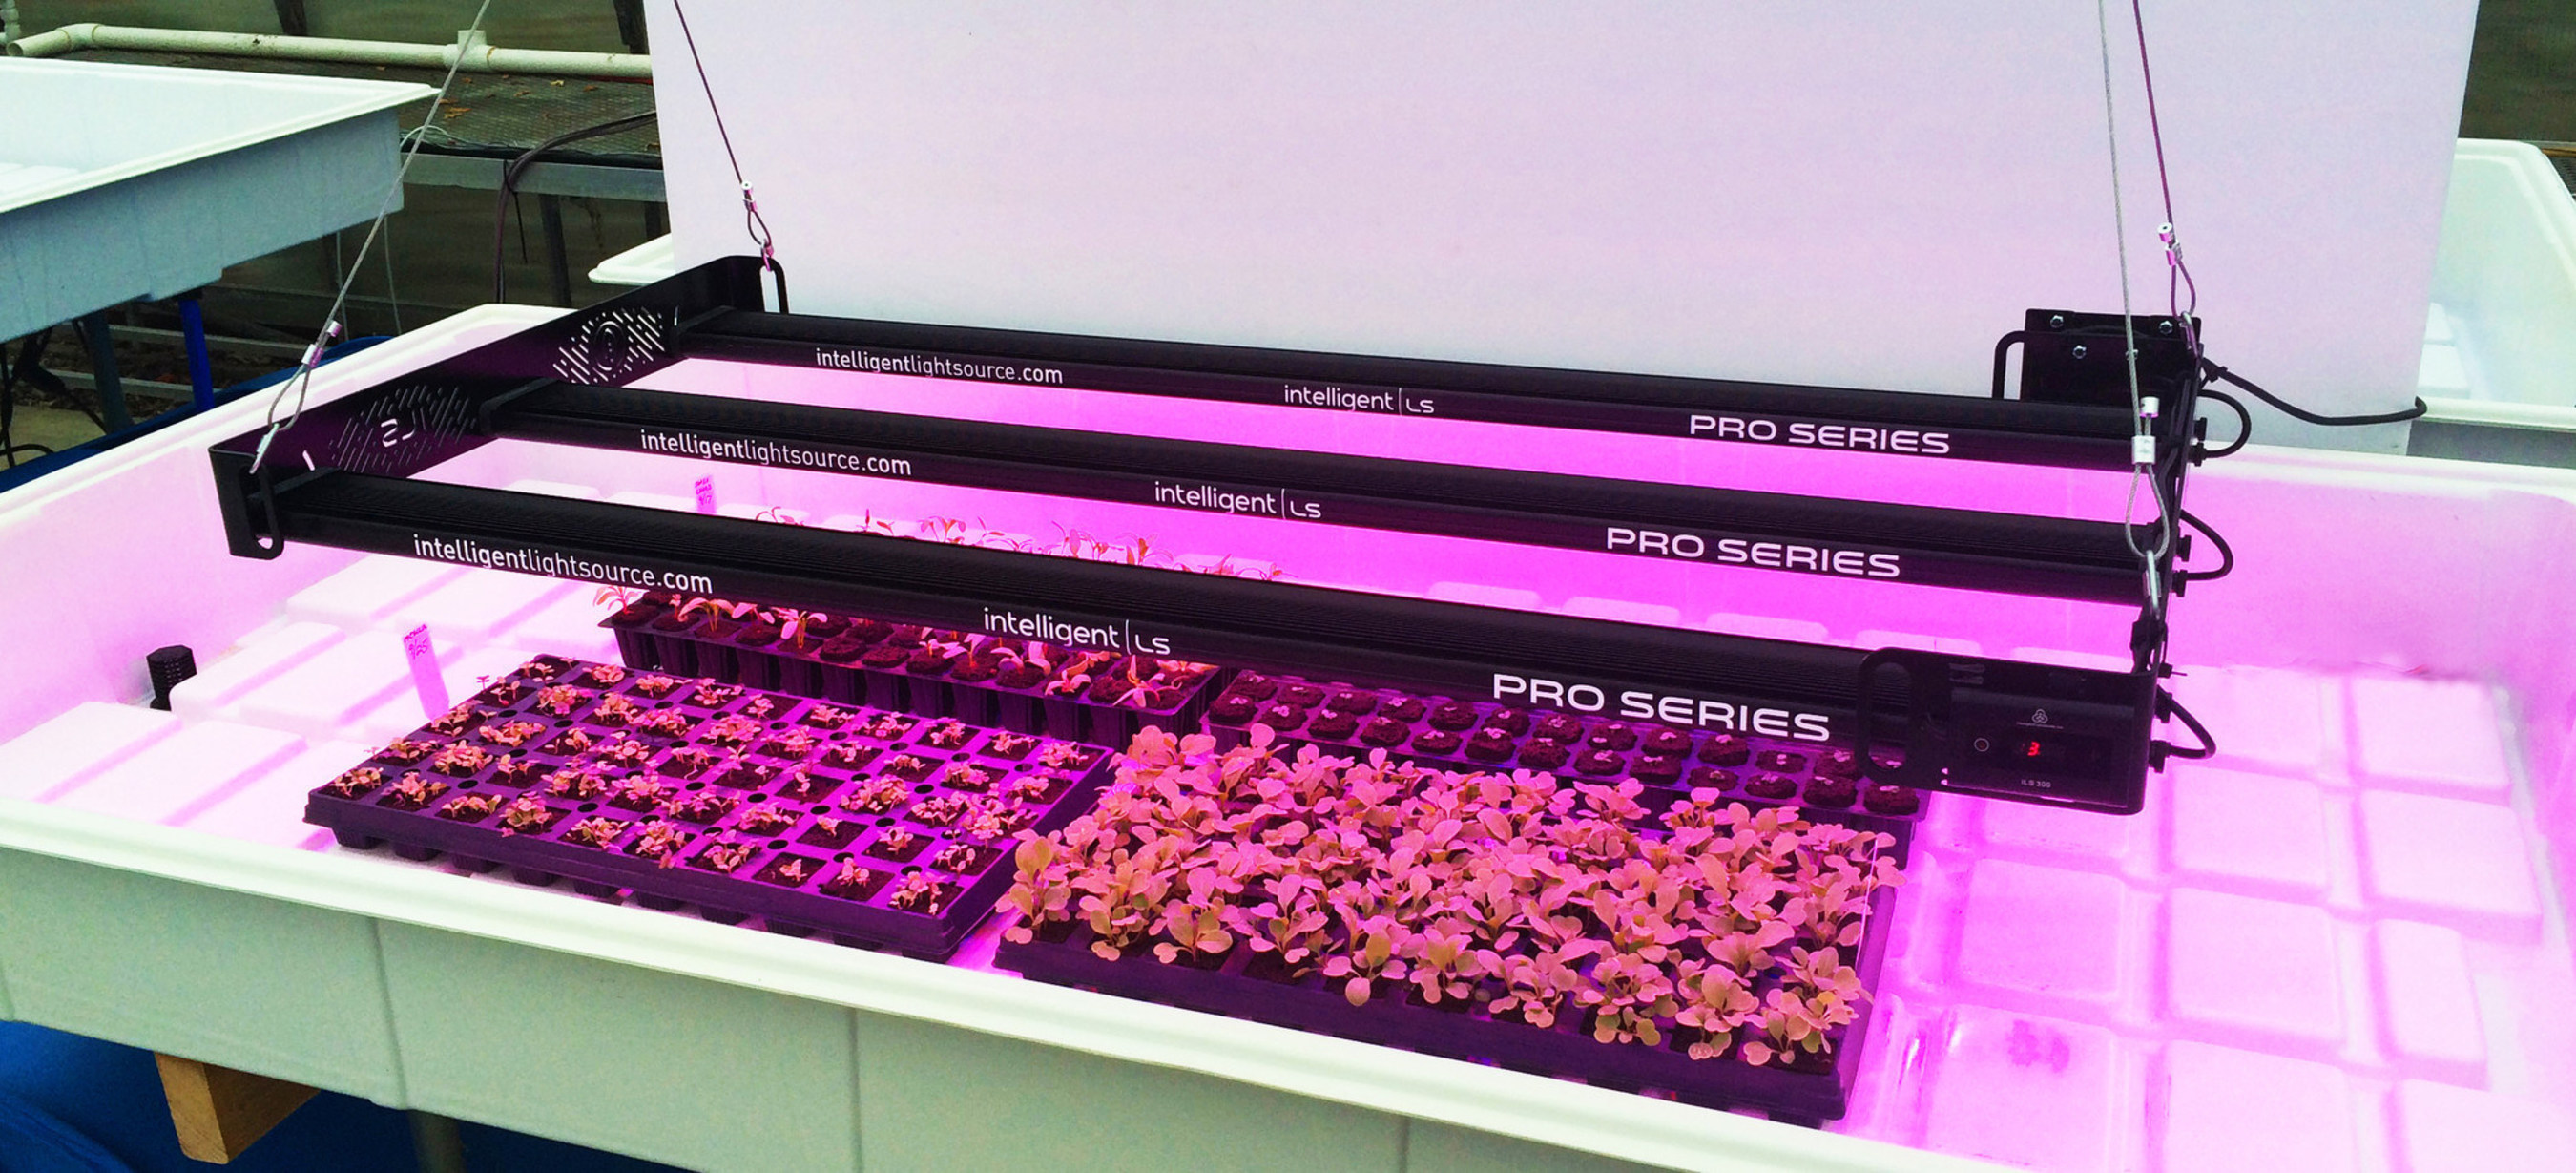 ILS is positioned to become a leader in the indoor grow light industry projected to reach $3.6 B by 2020